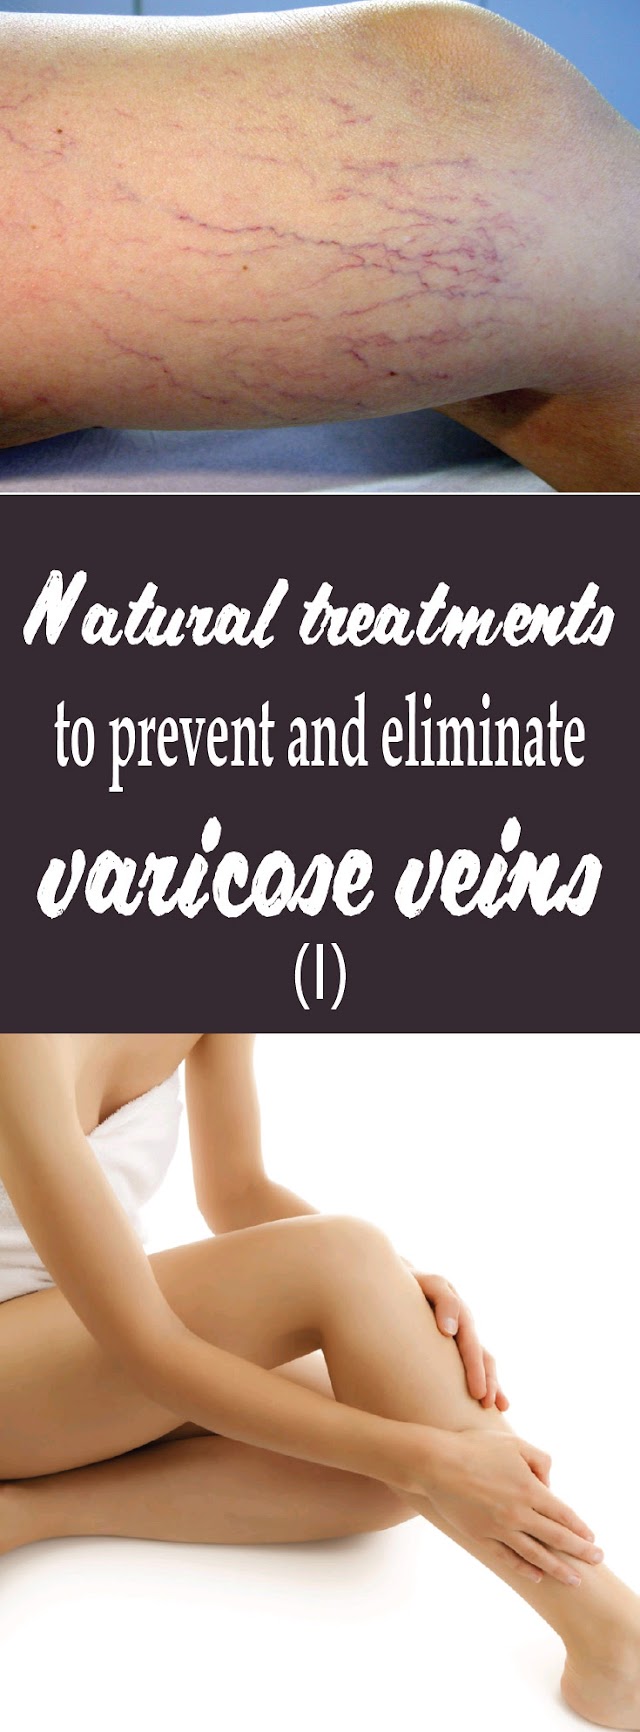 Natural treatments to prevent and eliminate varicose veins